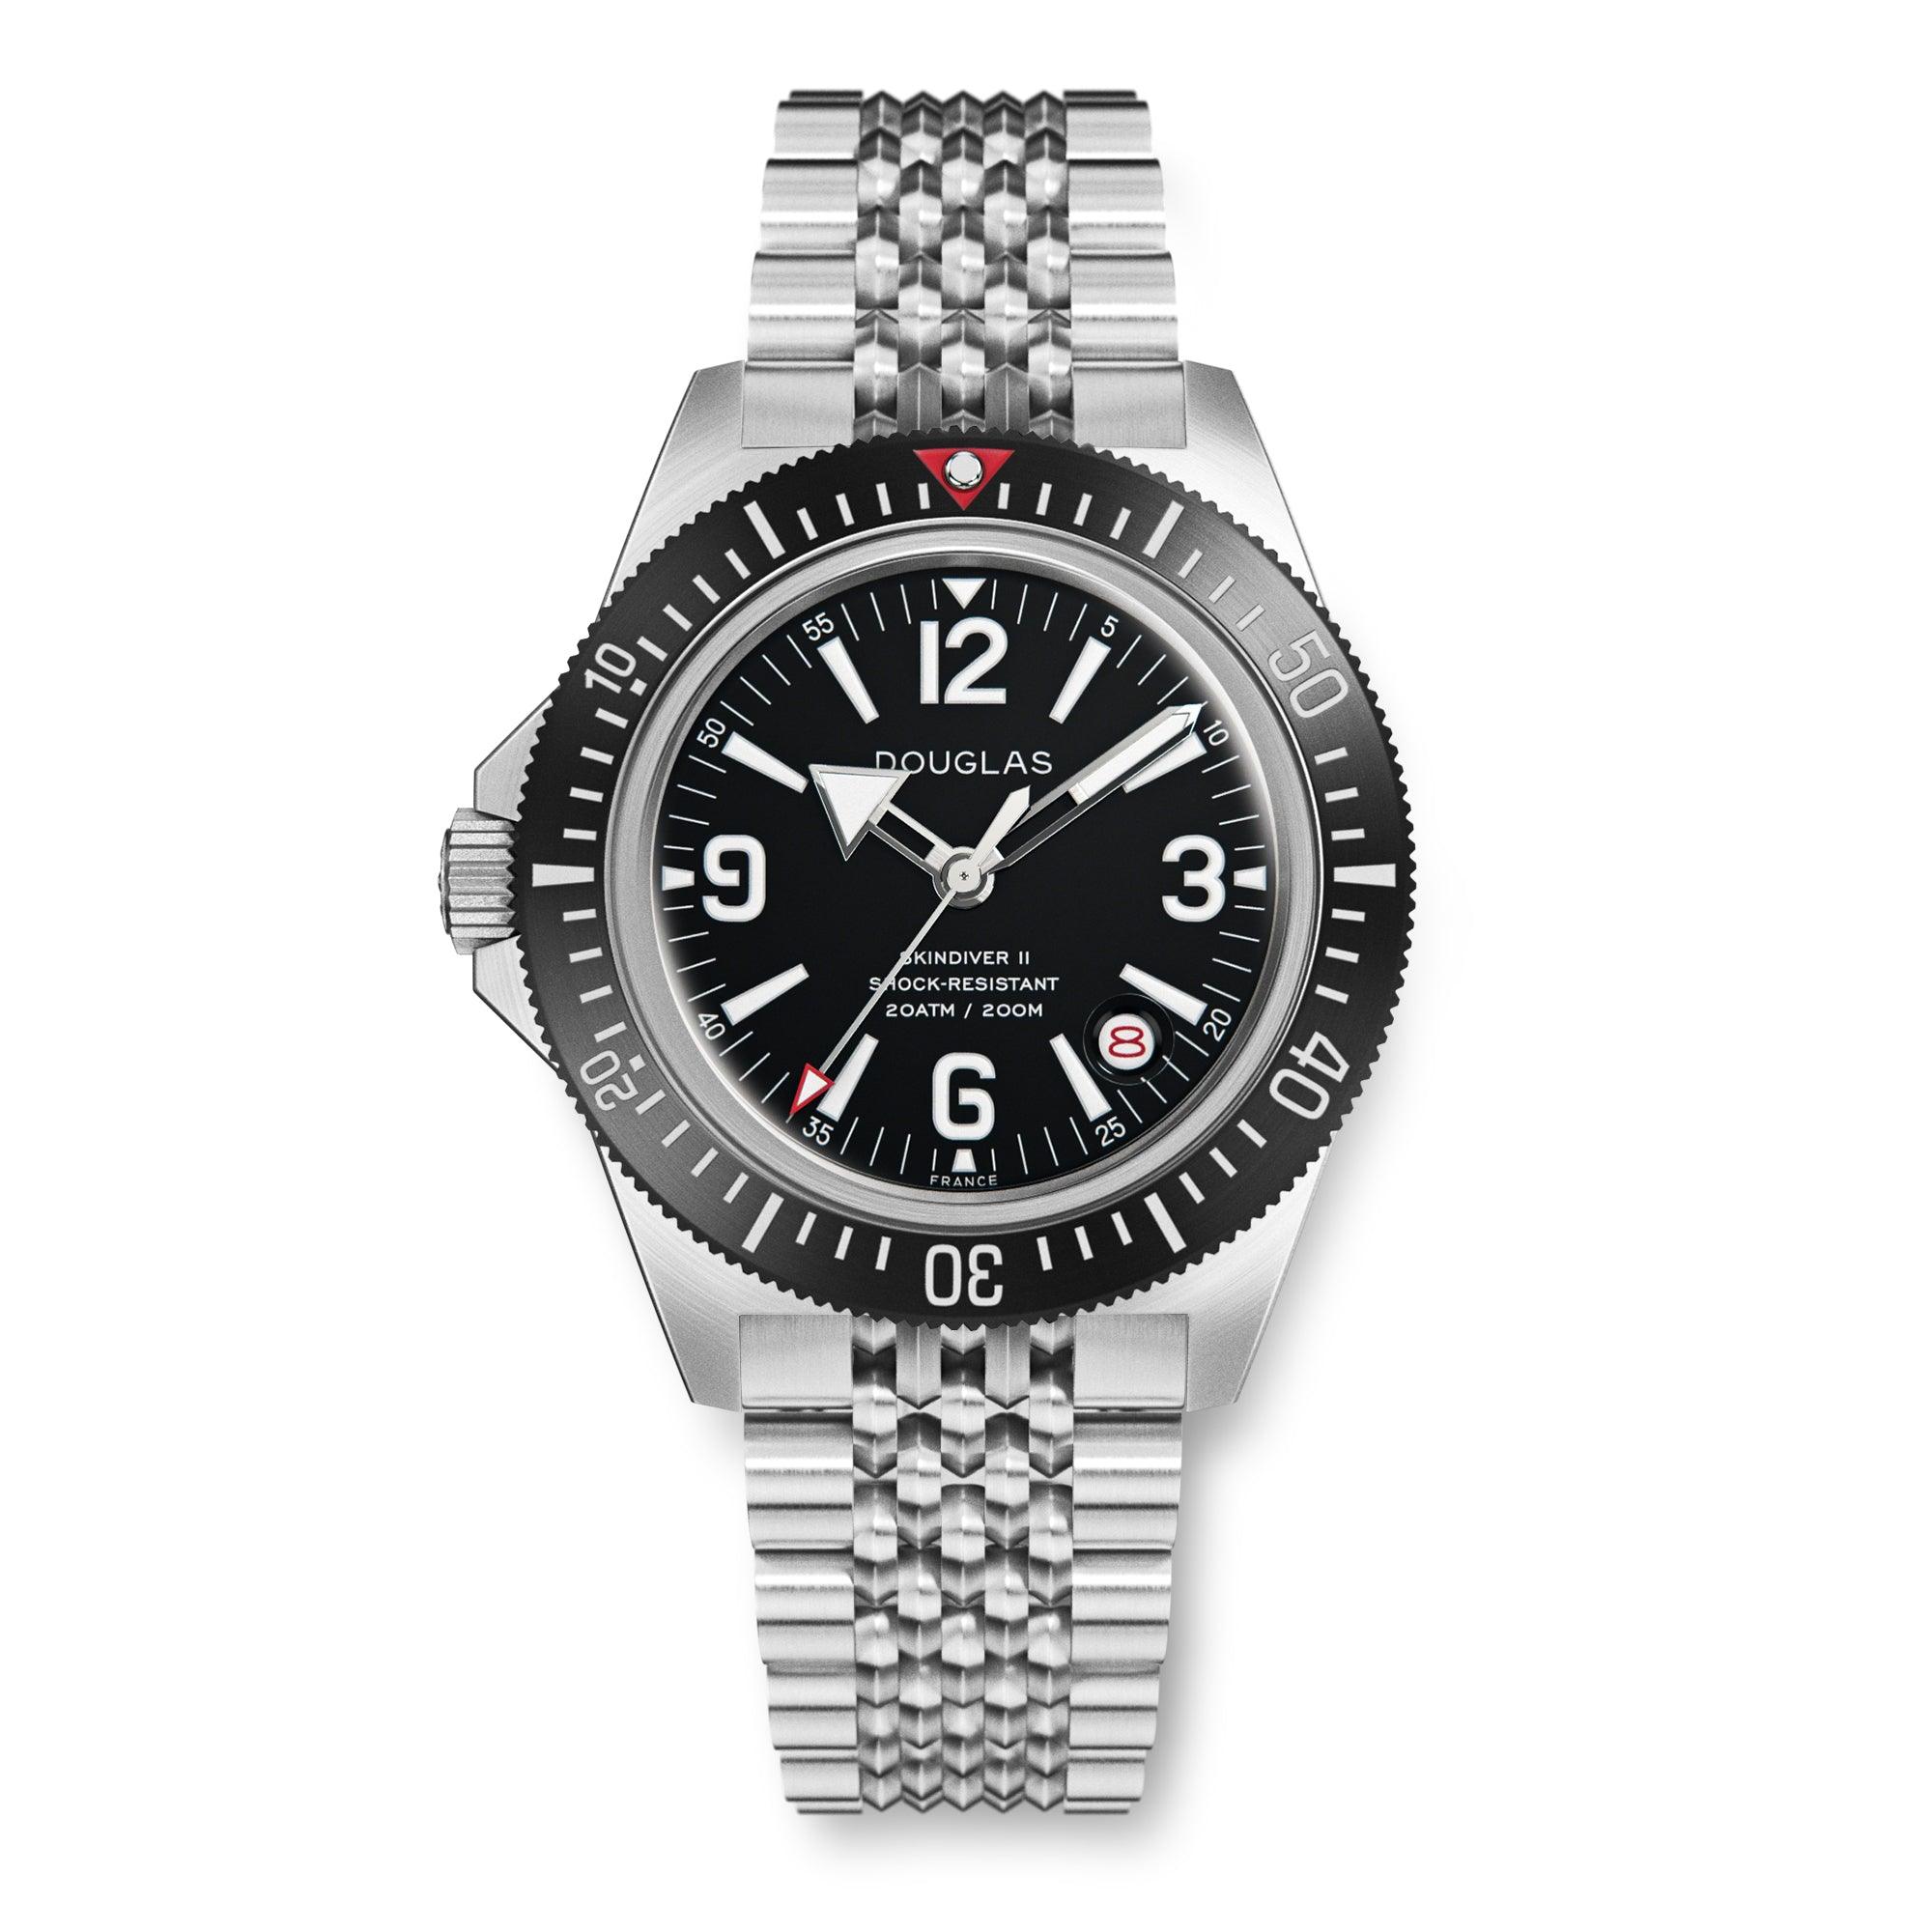 Skindiver II Professional Bracelet Diving Watch - White Lum & Black Dial - Wolbrook Watches